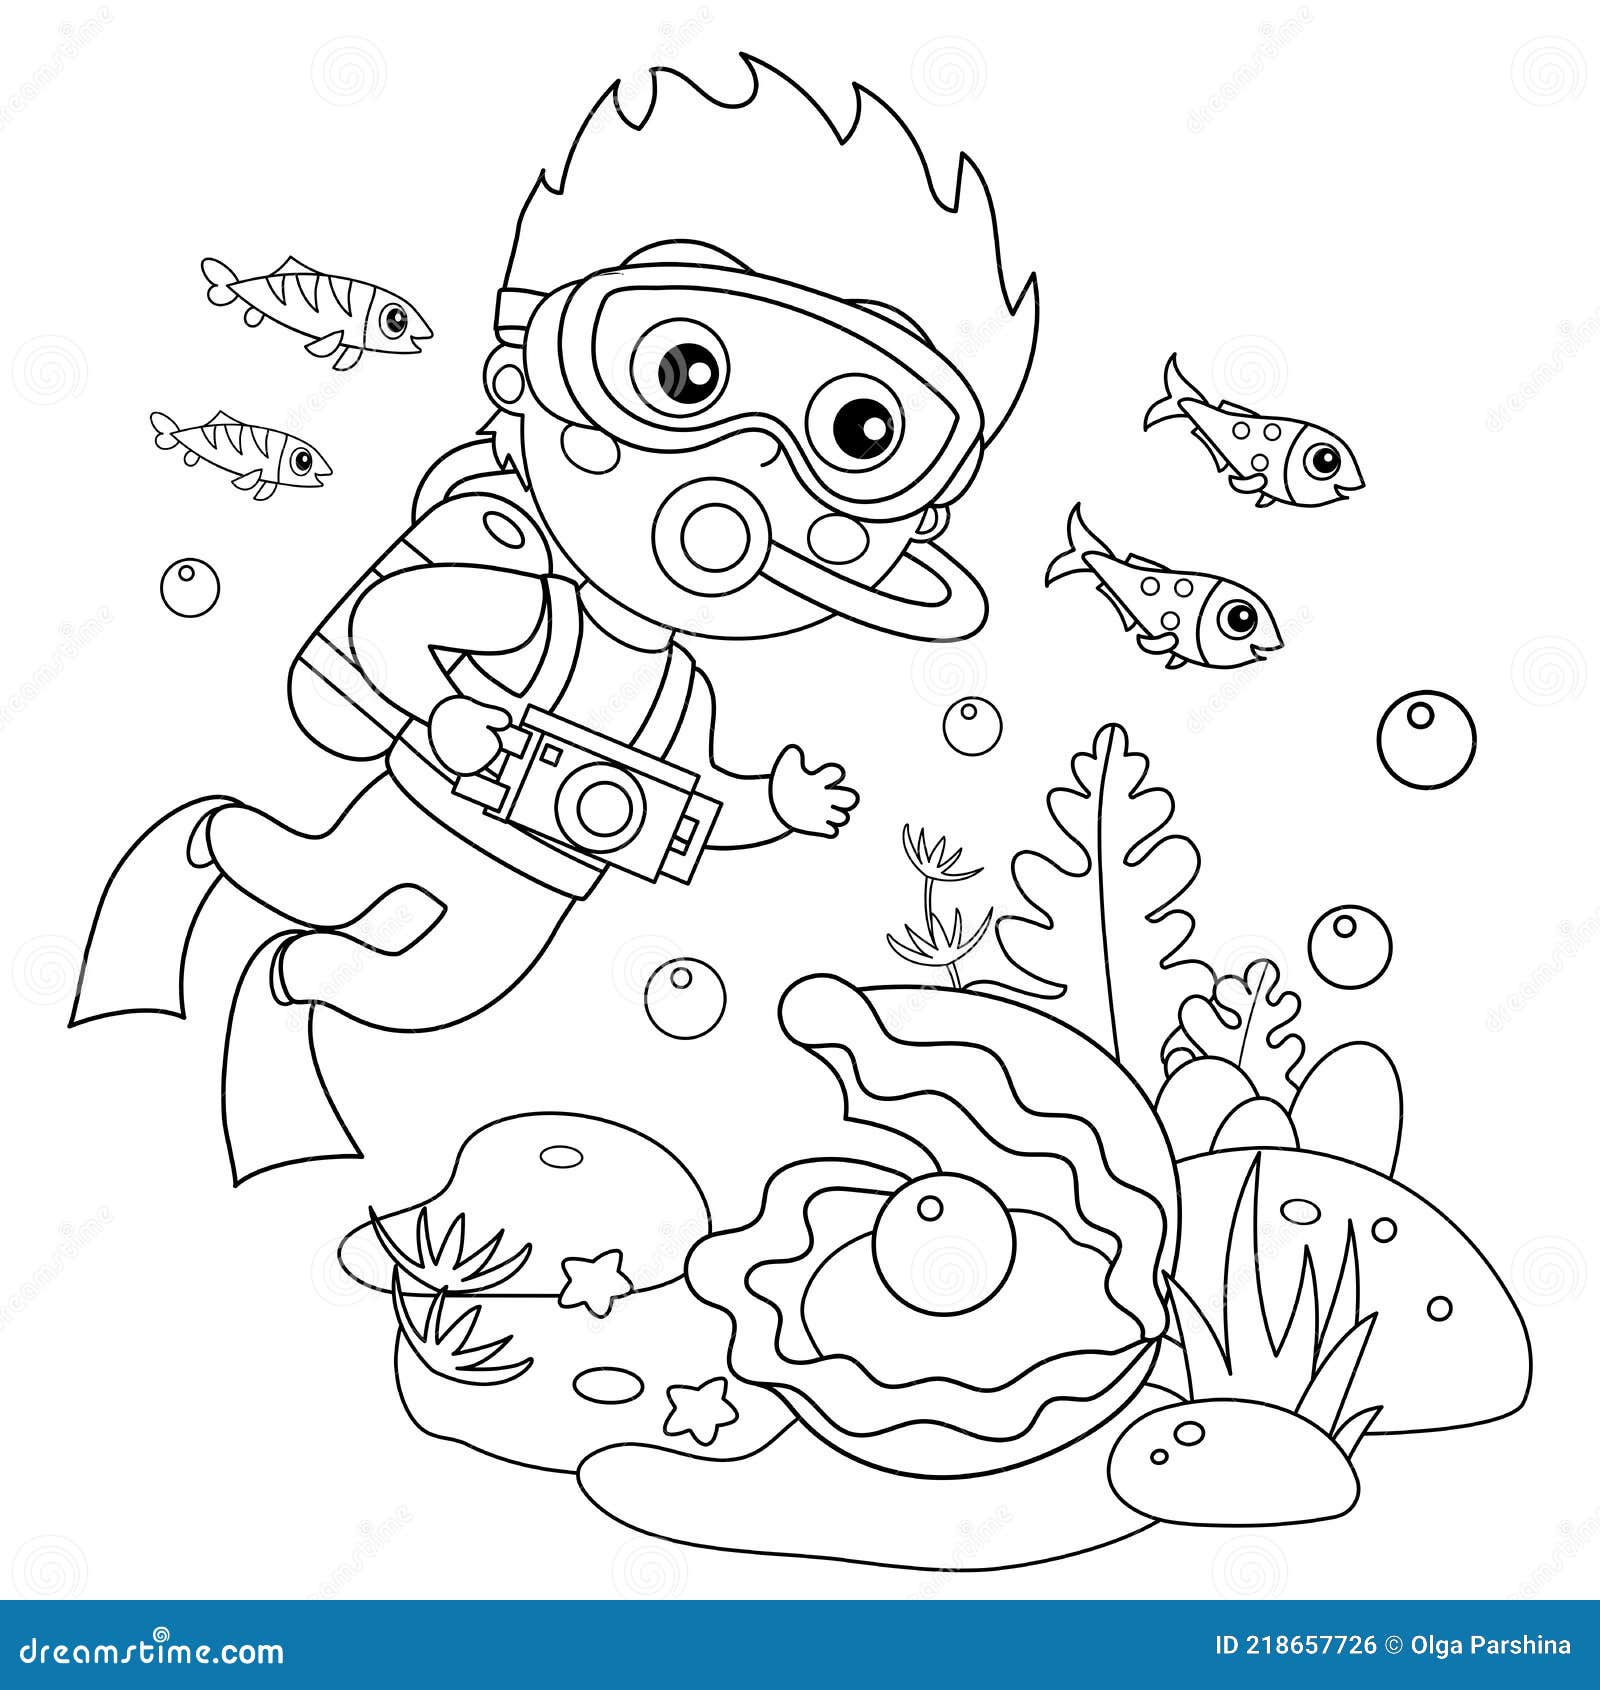 Coloring page outline of cartoon little boy scuba diver marine photography or shooting underwater world stock vector